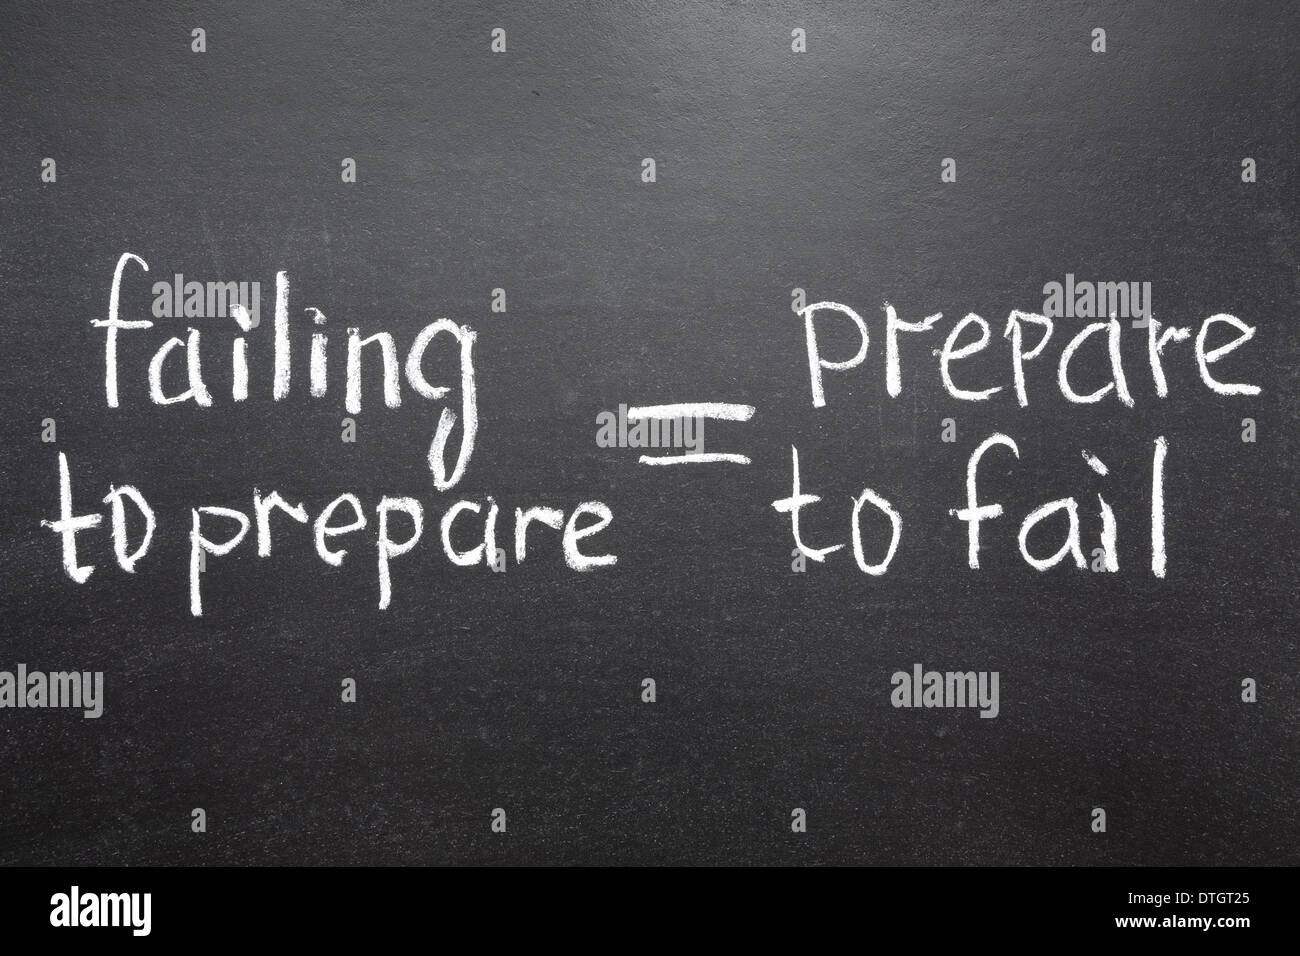 interpretation of famous quote of B. Franklin 'By failing to prepare, you are preparing to fail.' handwritten on blackboard Stock Photo